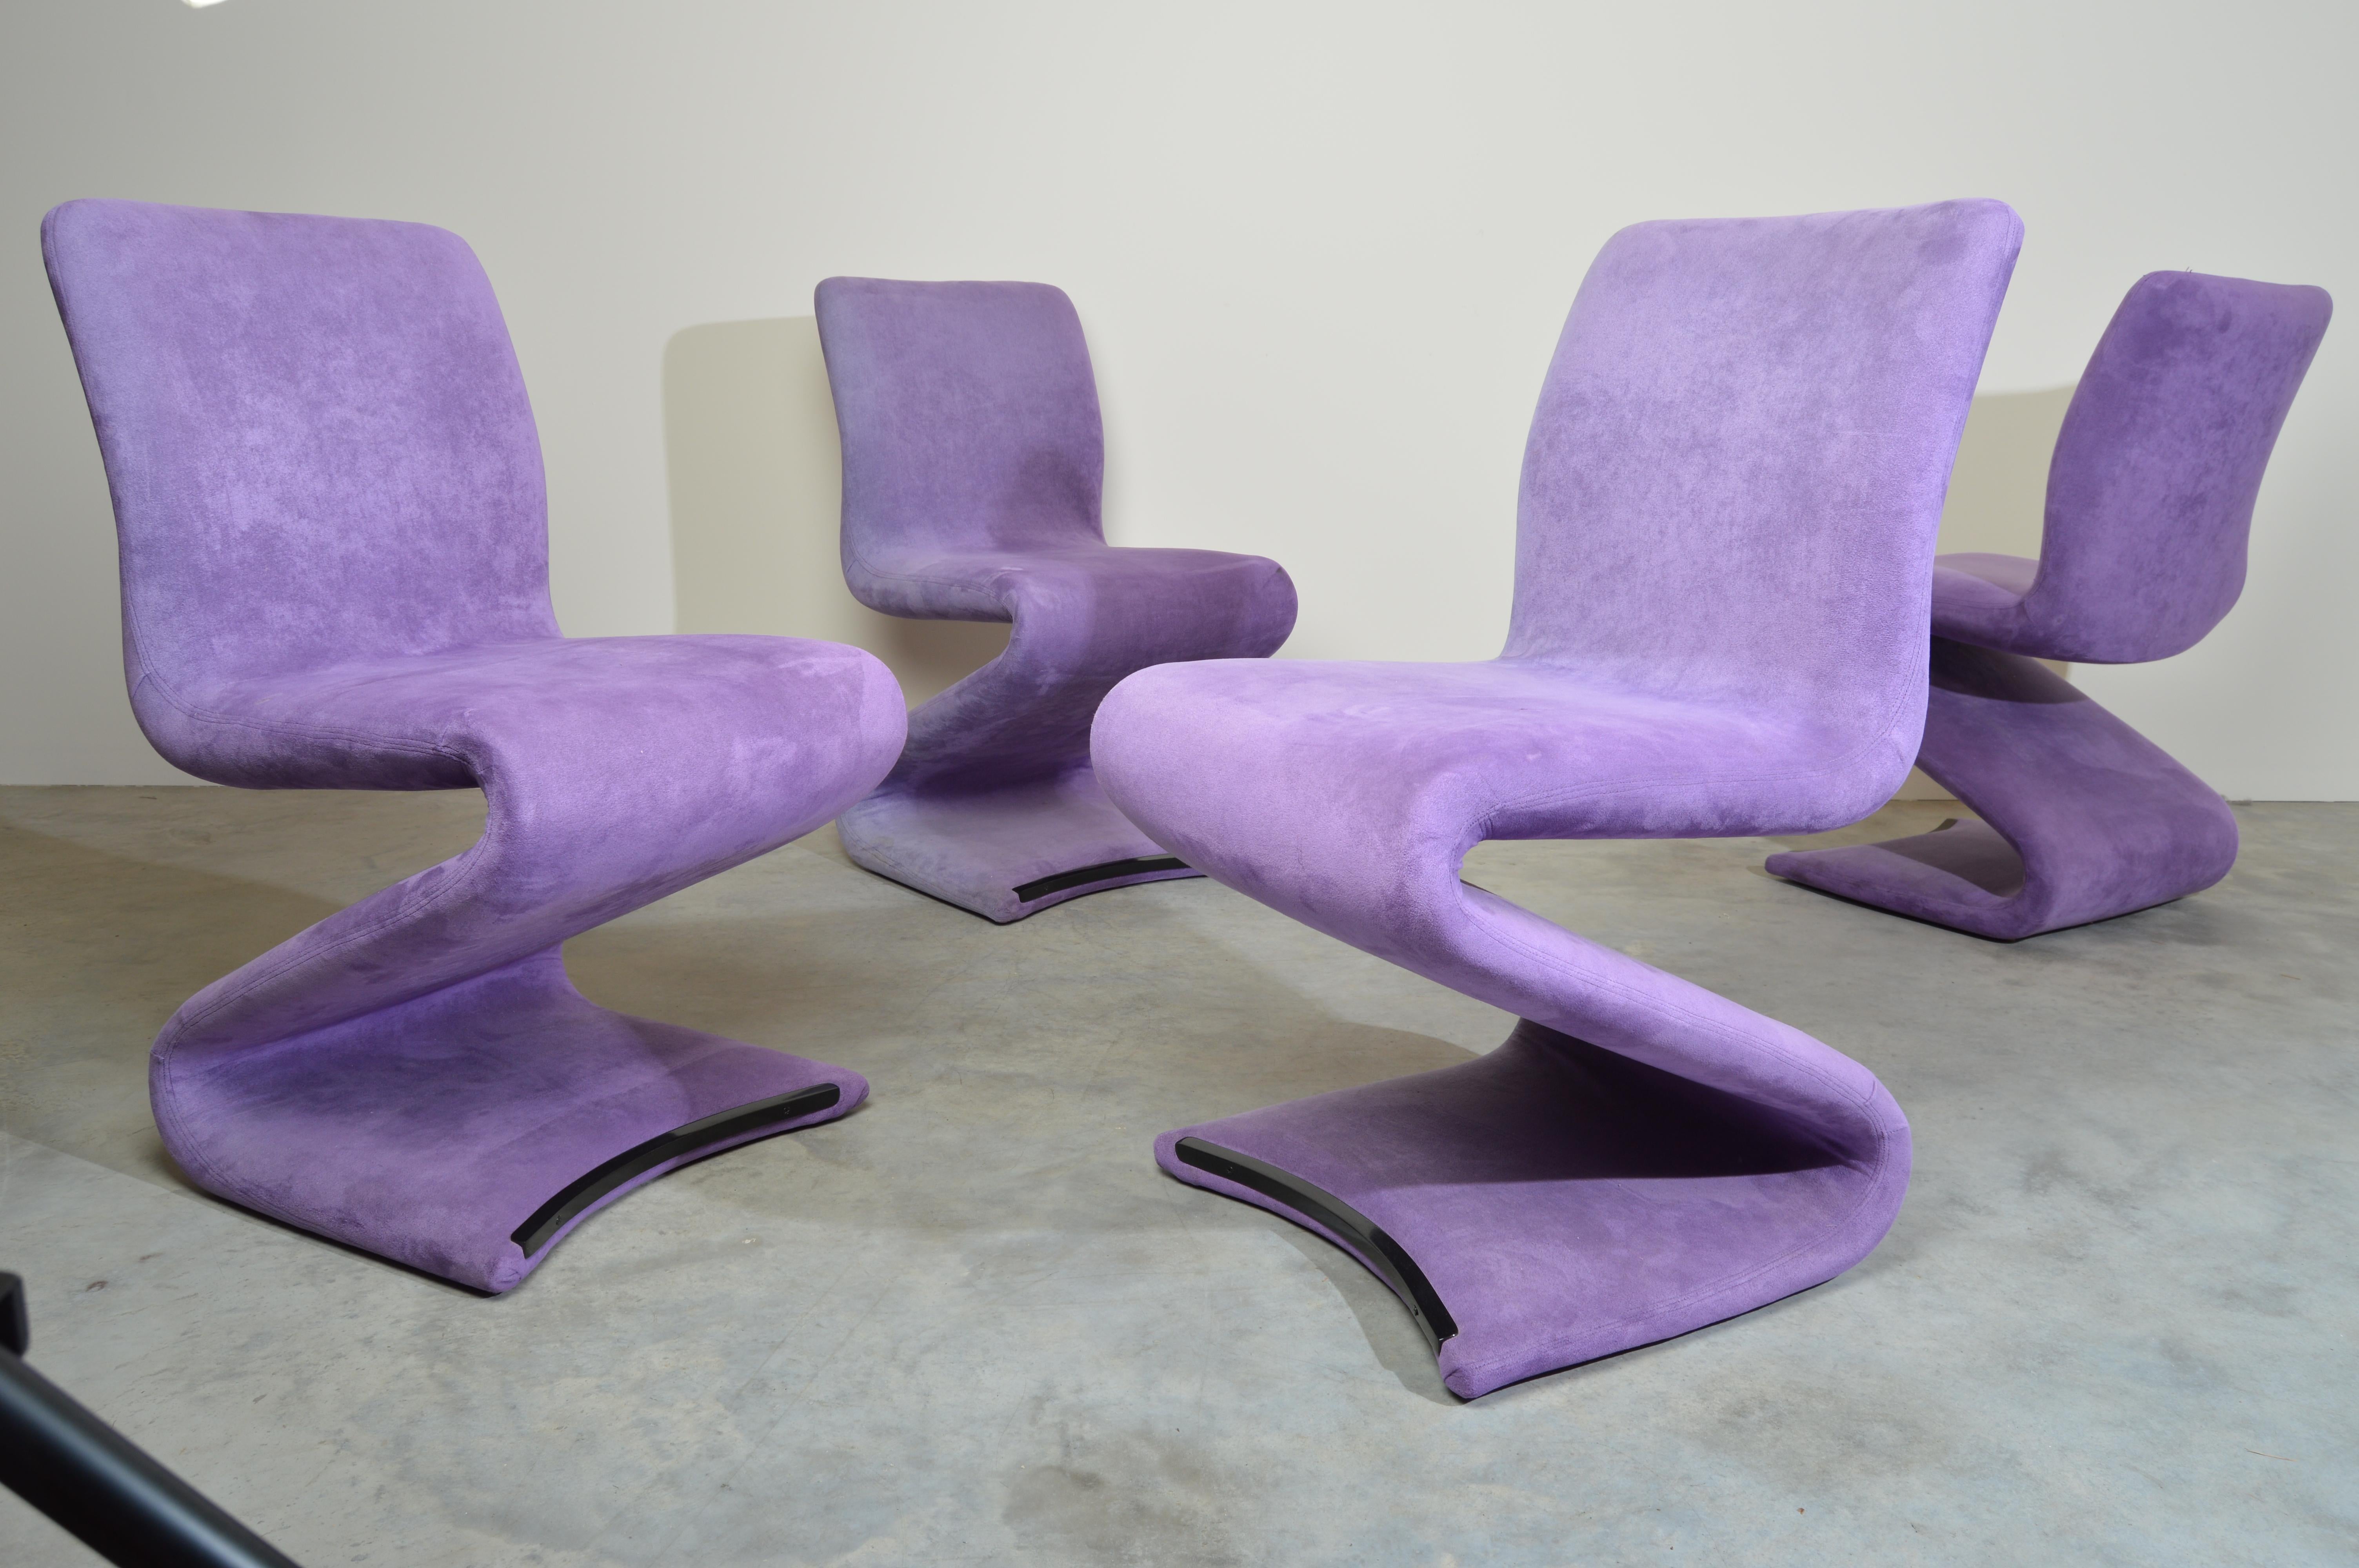 A beautiful and very comfortable set of 4 S form cantilever dining chairs attributed to Verner Panton upholstered in soft ultrasuede.
Very good vintage condition. Solid, well built frames with clean upholstery,
circa 1980.
Ready for use!